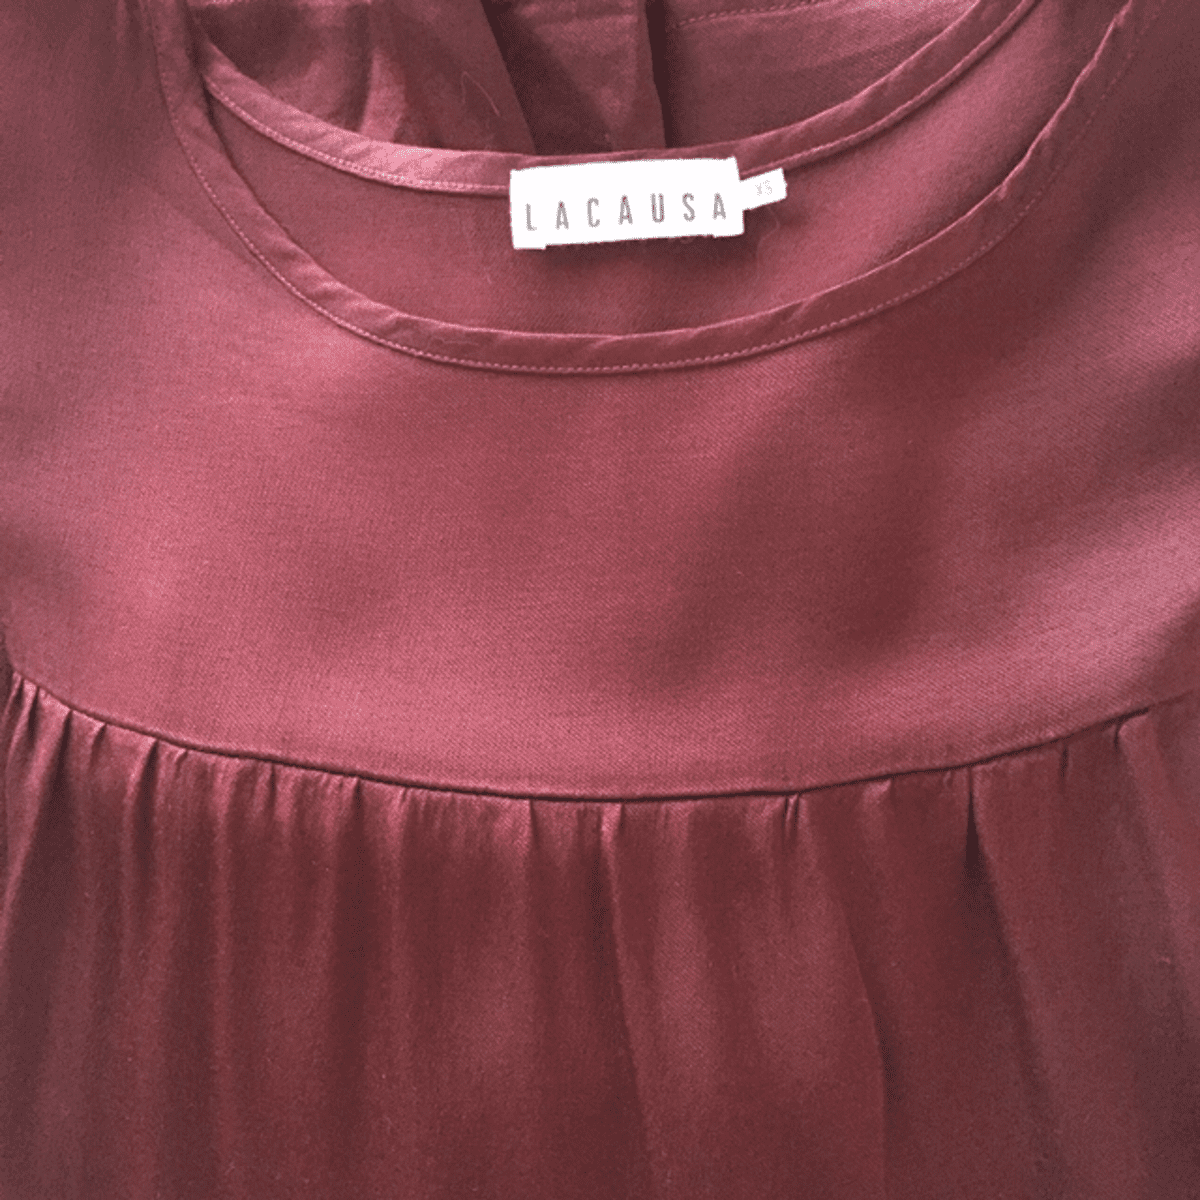 Lucky Brand Burgundy Top size M  Burgundy top, Clothes design